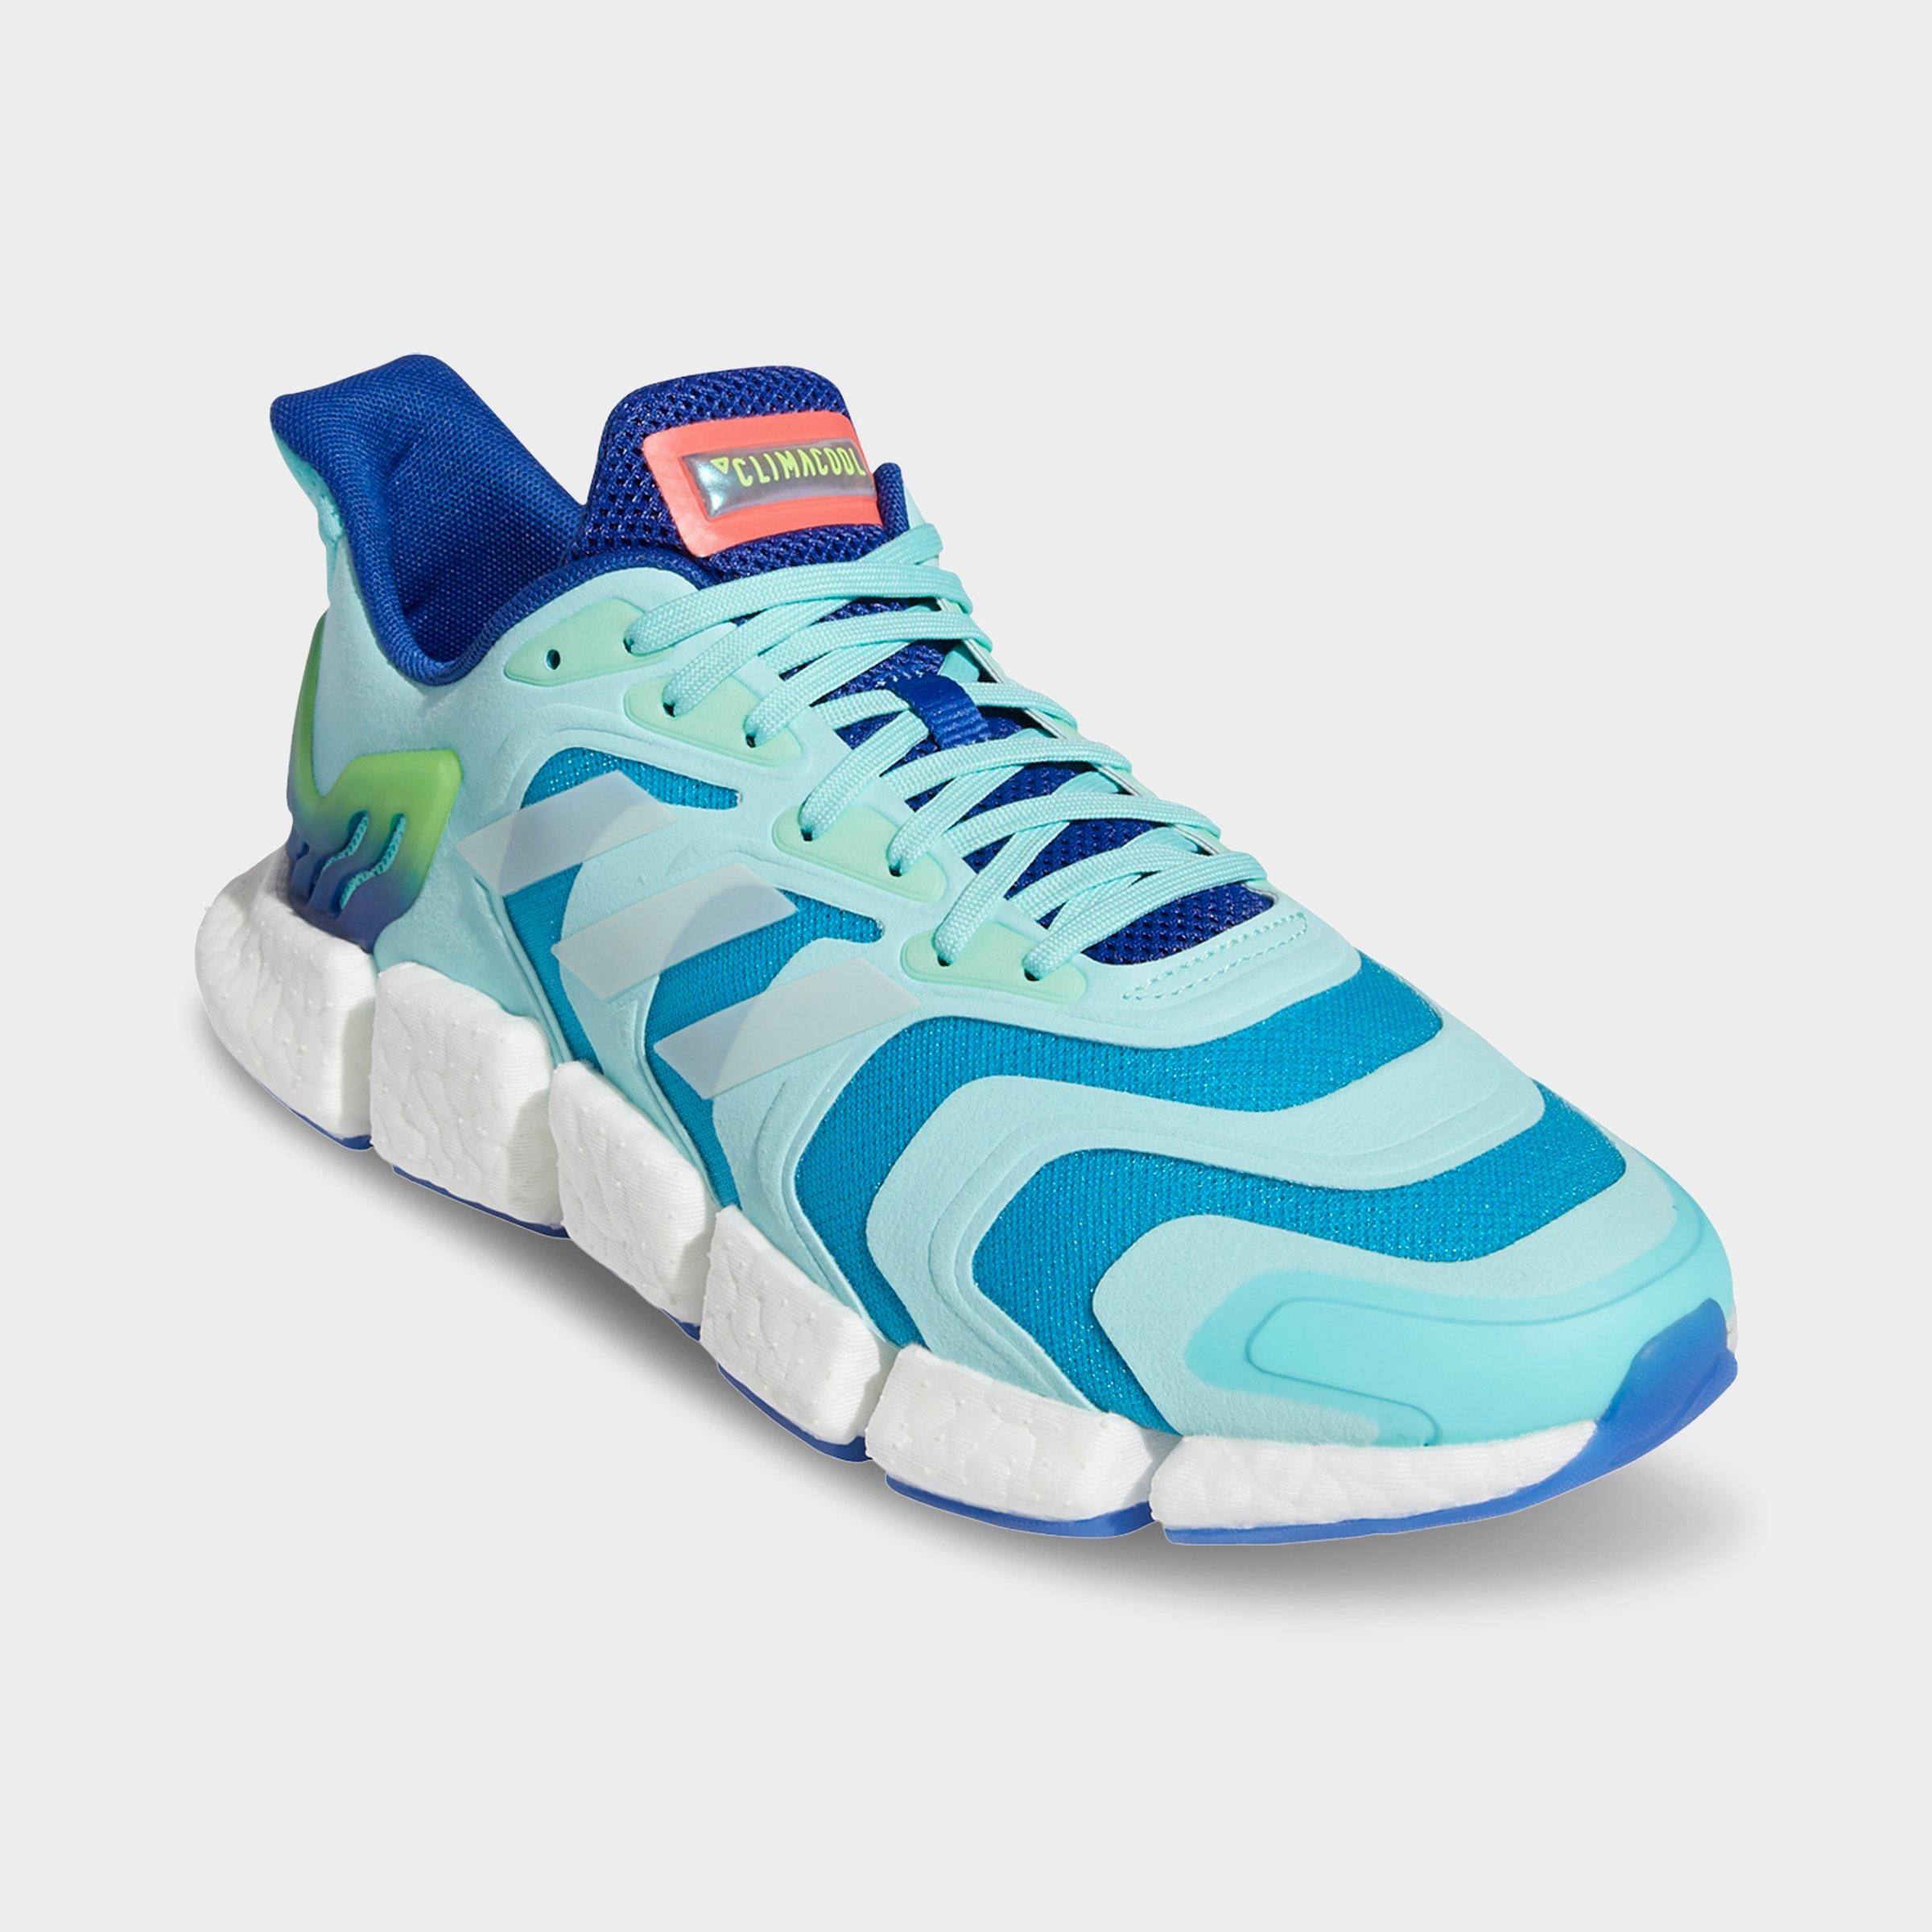 mens adidas climacool trainers sale